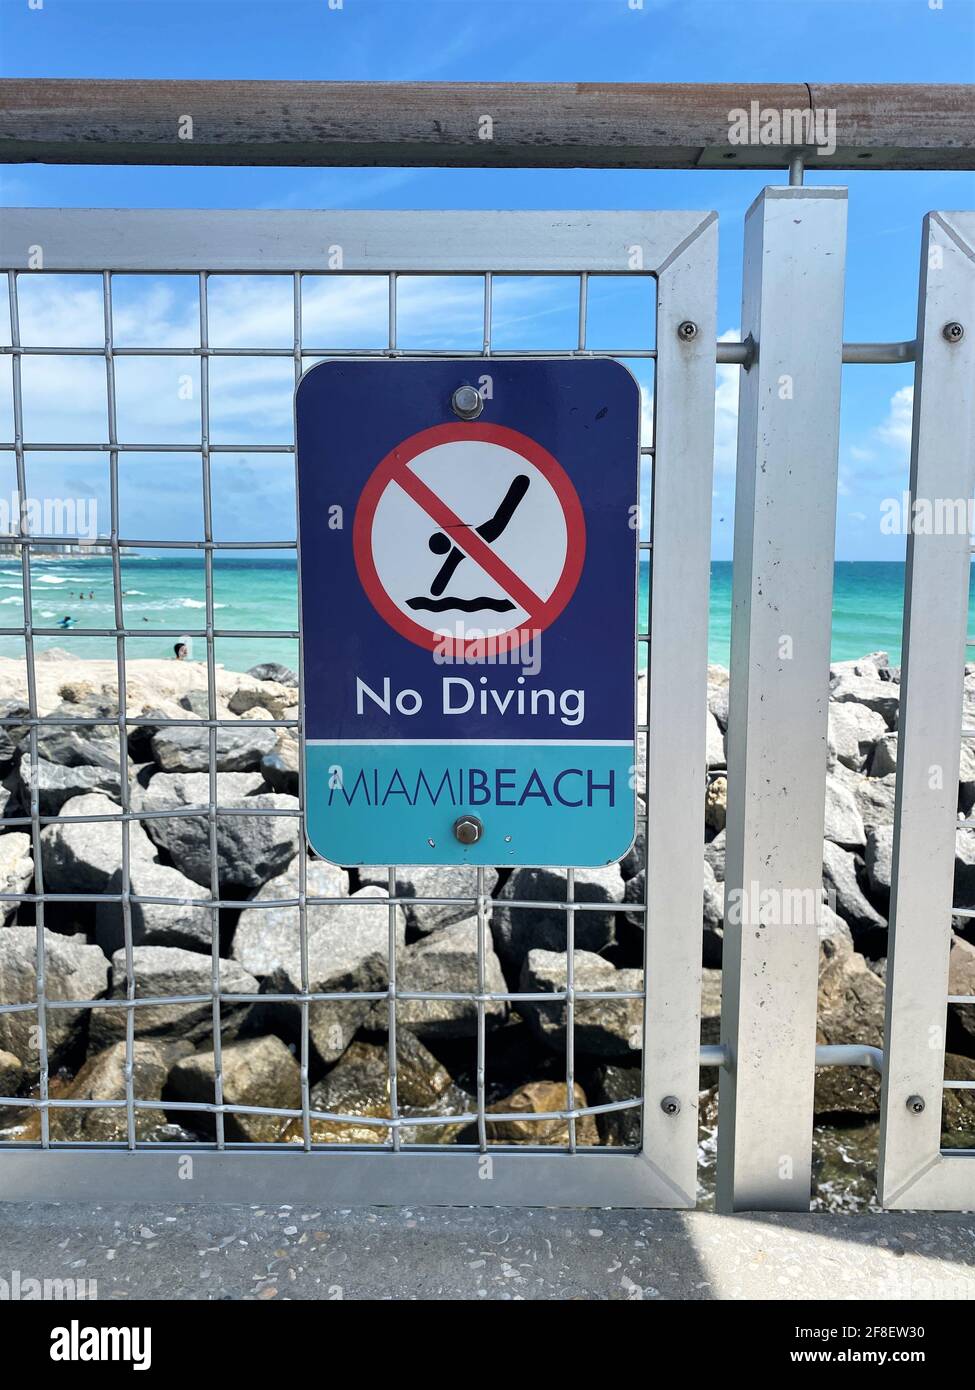 South Pointe Pier in Miami Beach, Florida sign for no diving allowed. Too many rocks and very dangerous. Stock Photo